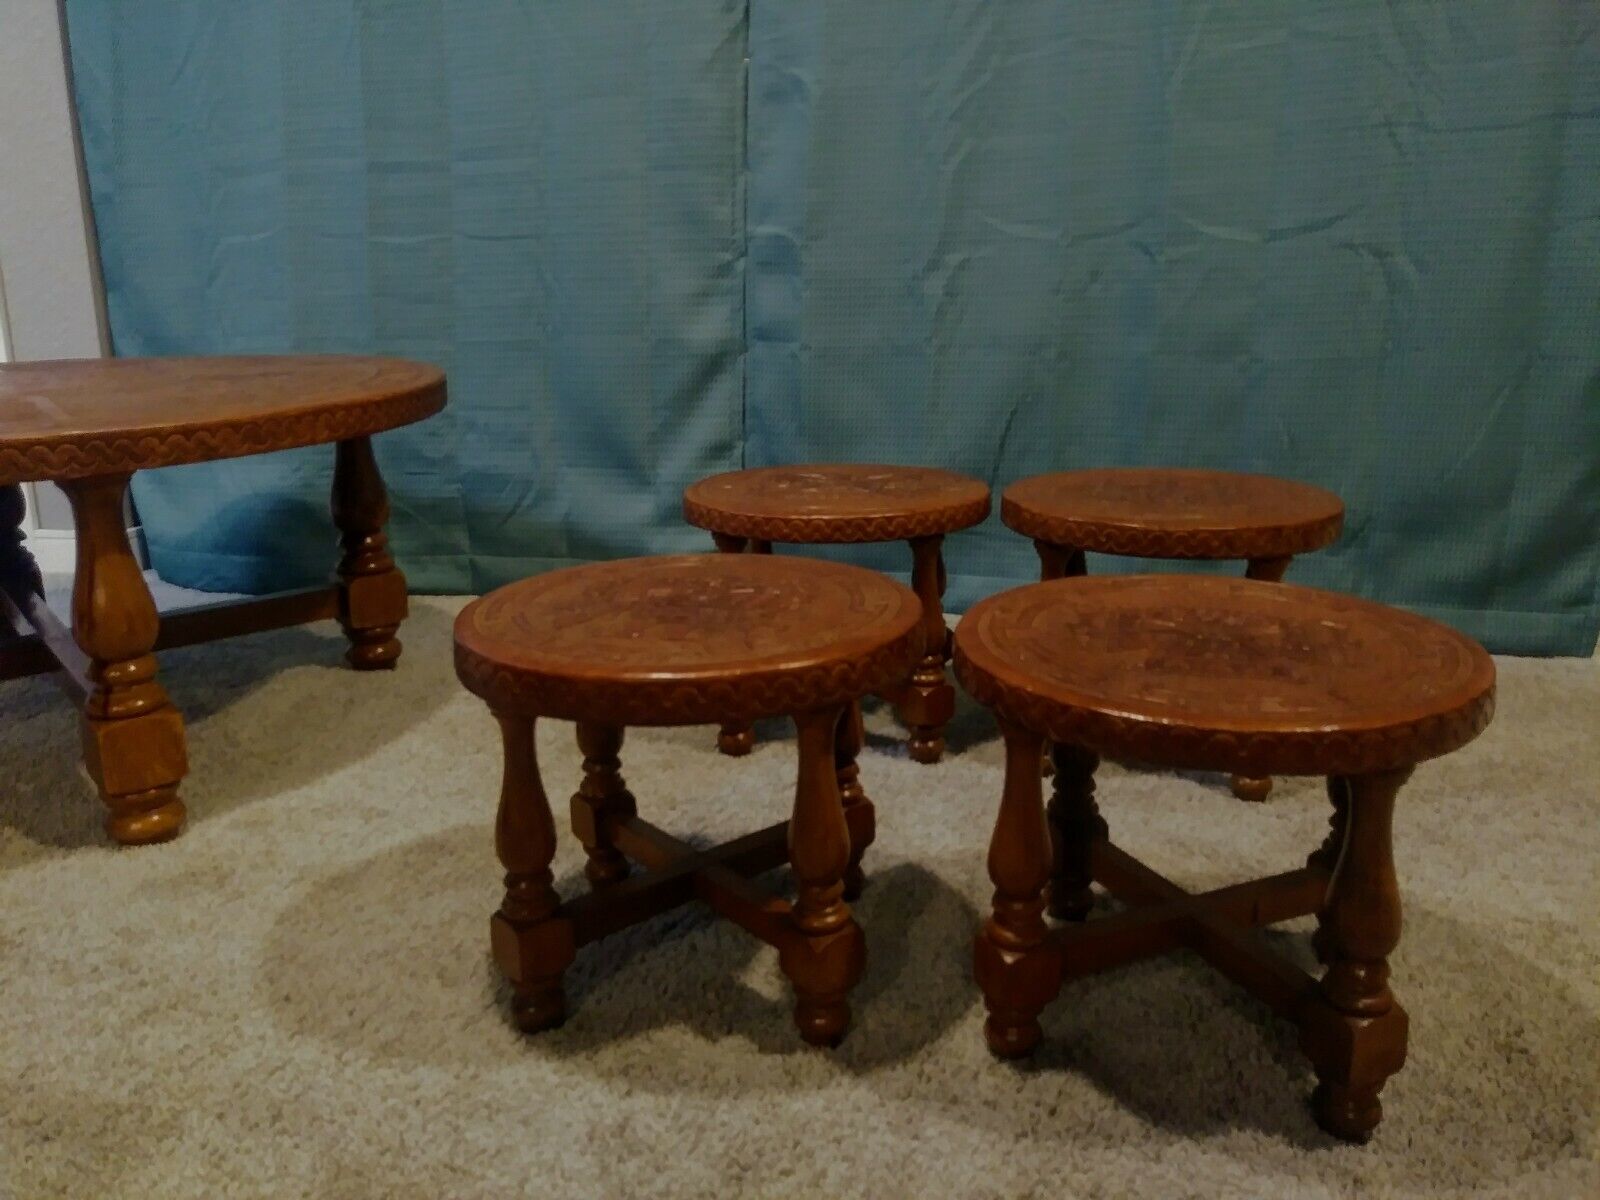 Vintage Rare Peruvian Hand Tooled Leather Wooden Coffee Table With 4 Stools Peruvian - фотография #2